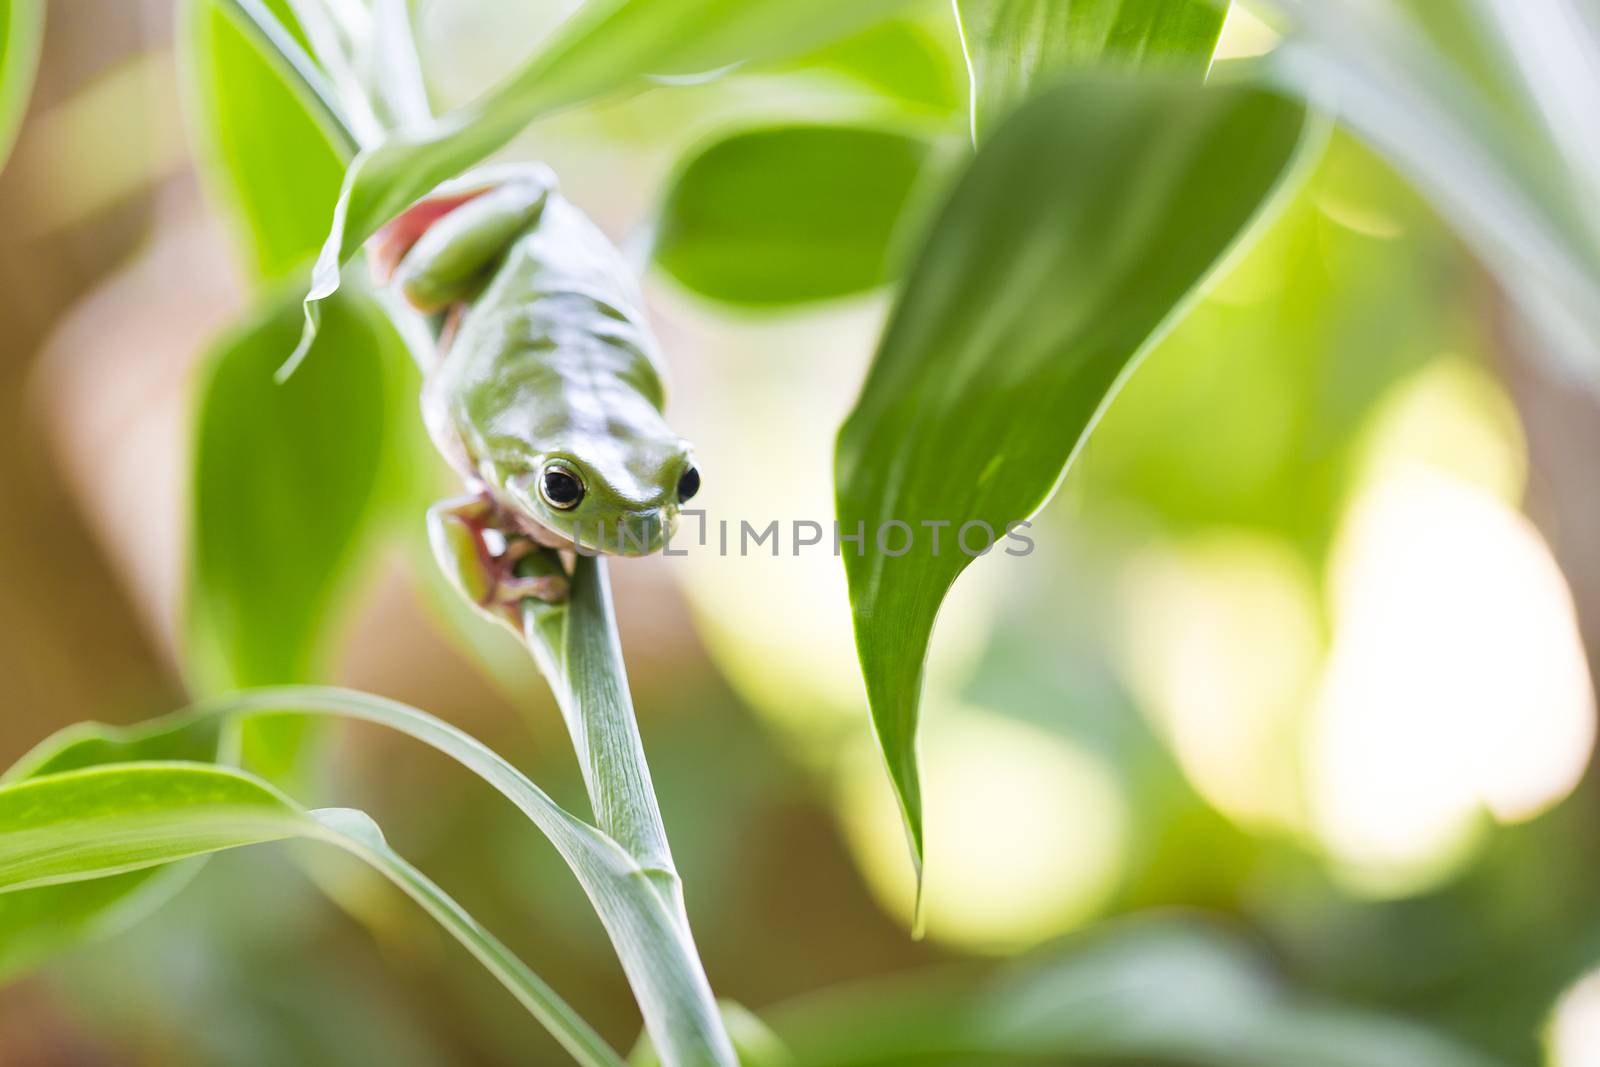 Australian Green Tree Frog sneaking on a plant hunting for prey.